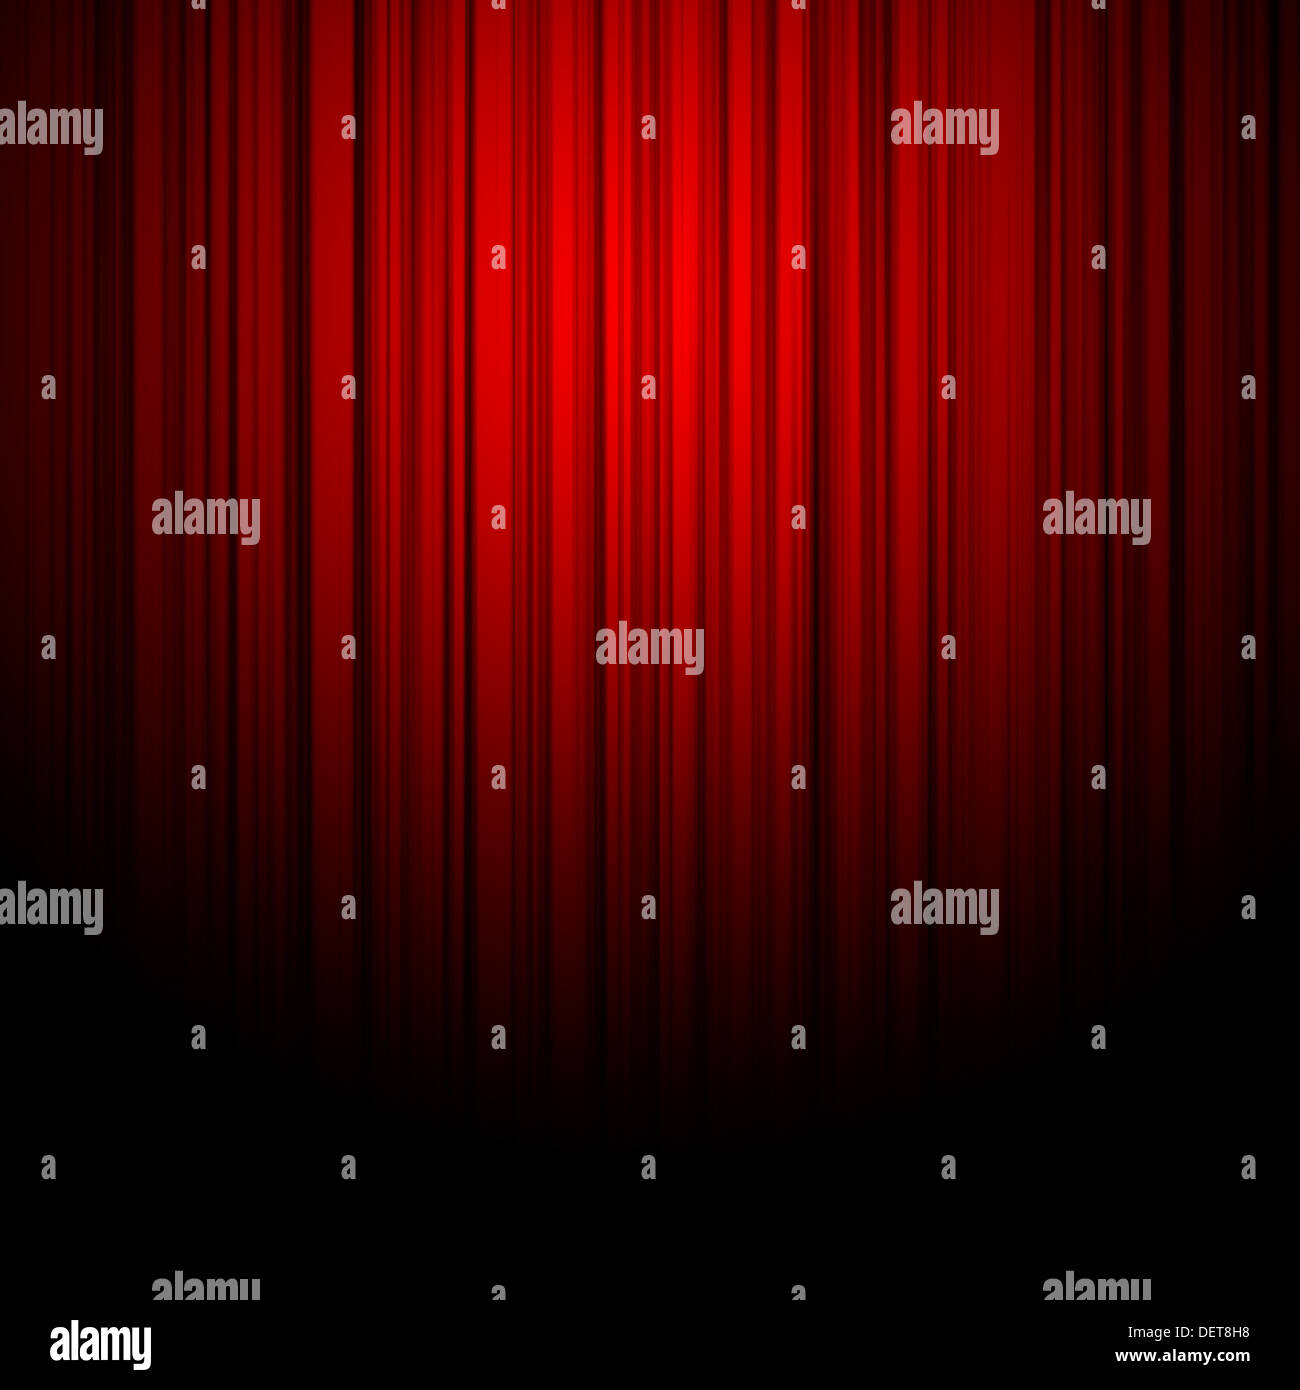 Red curtains on theater or cinema stage Stock Photo